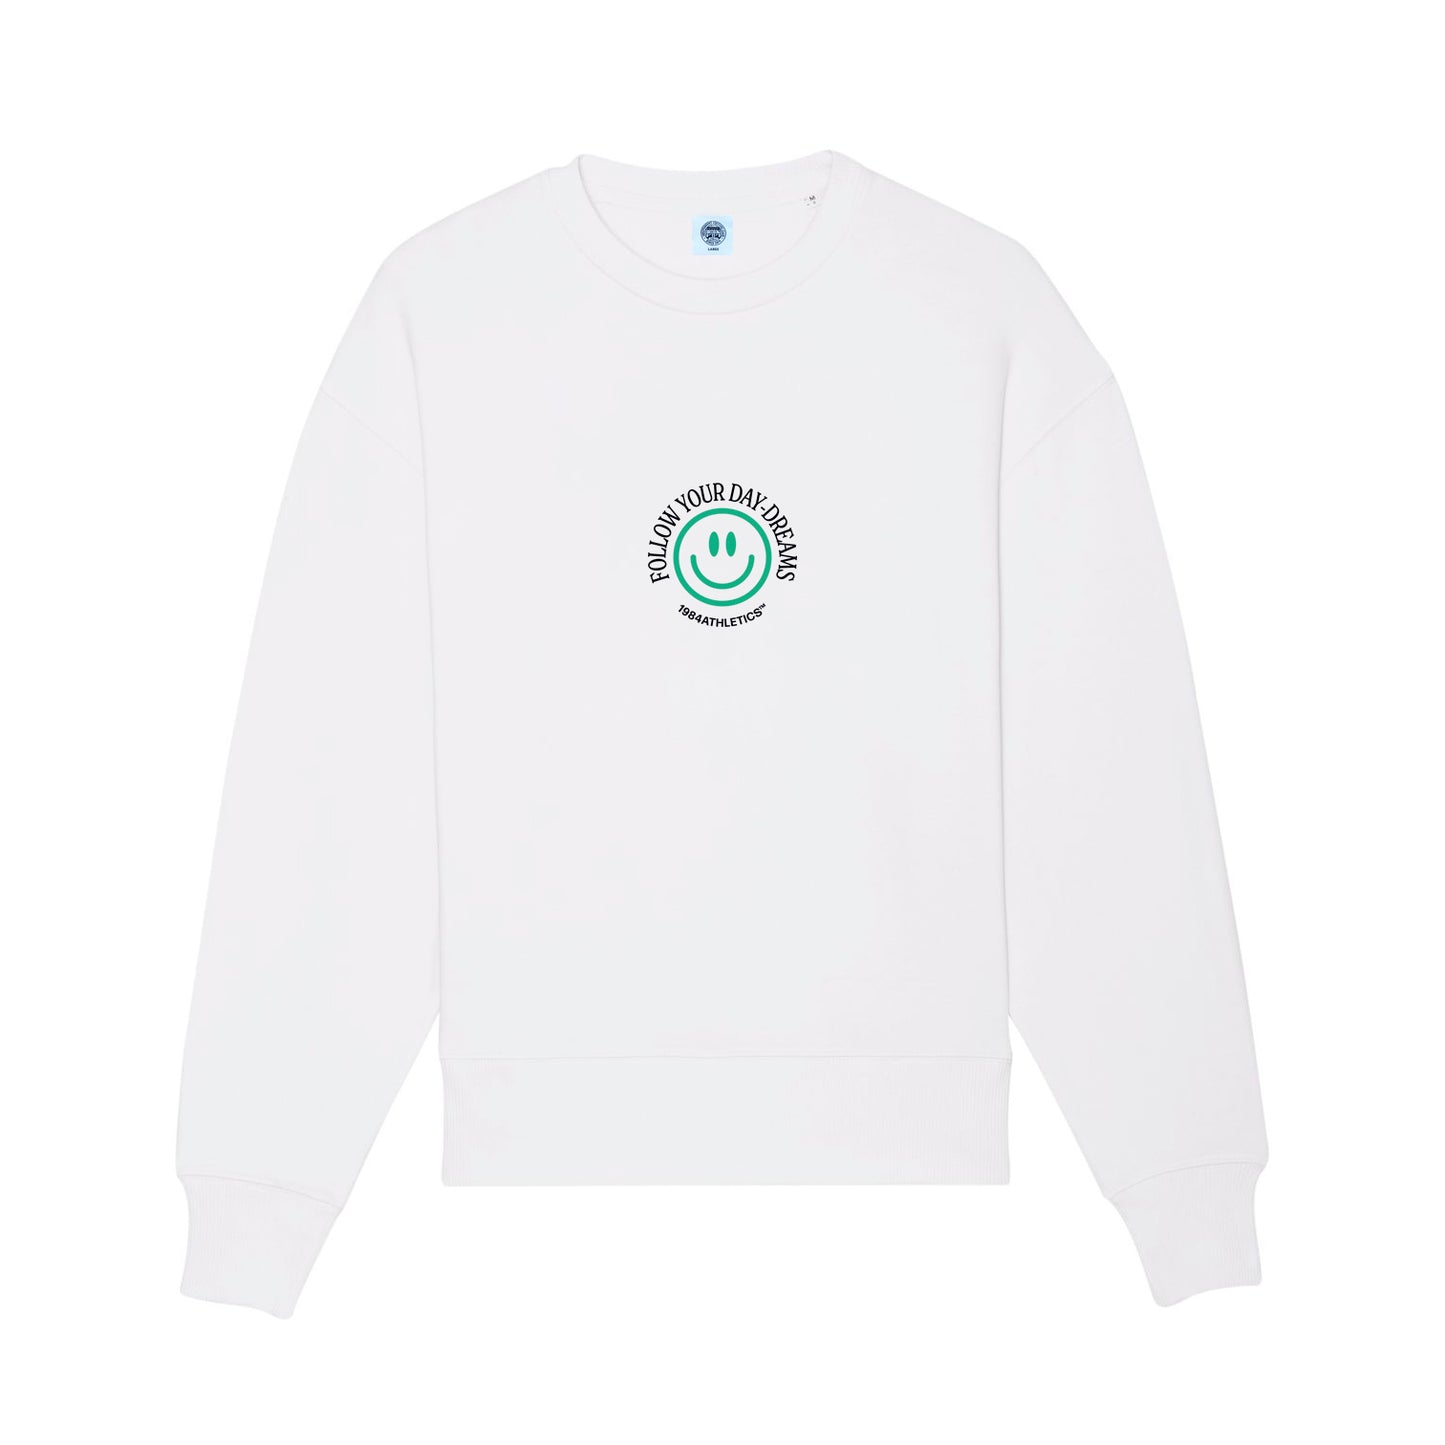 Vice 84 'Day-Dreams' Embroidered Sweatshirt - White